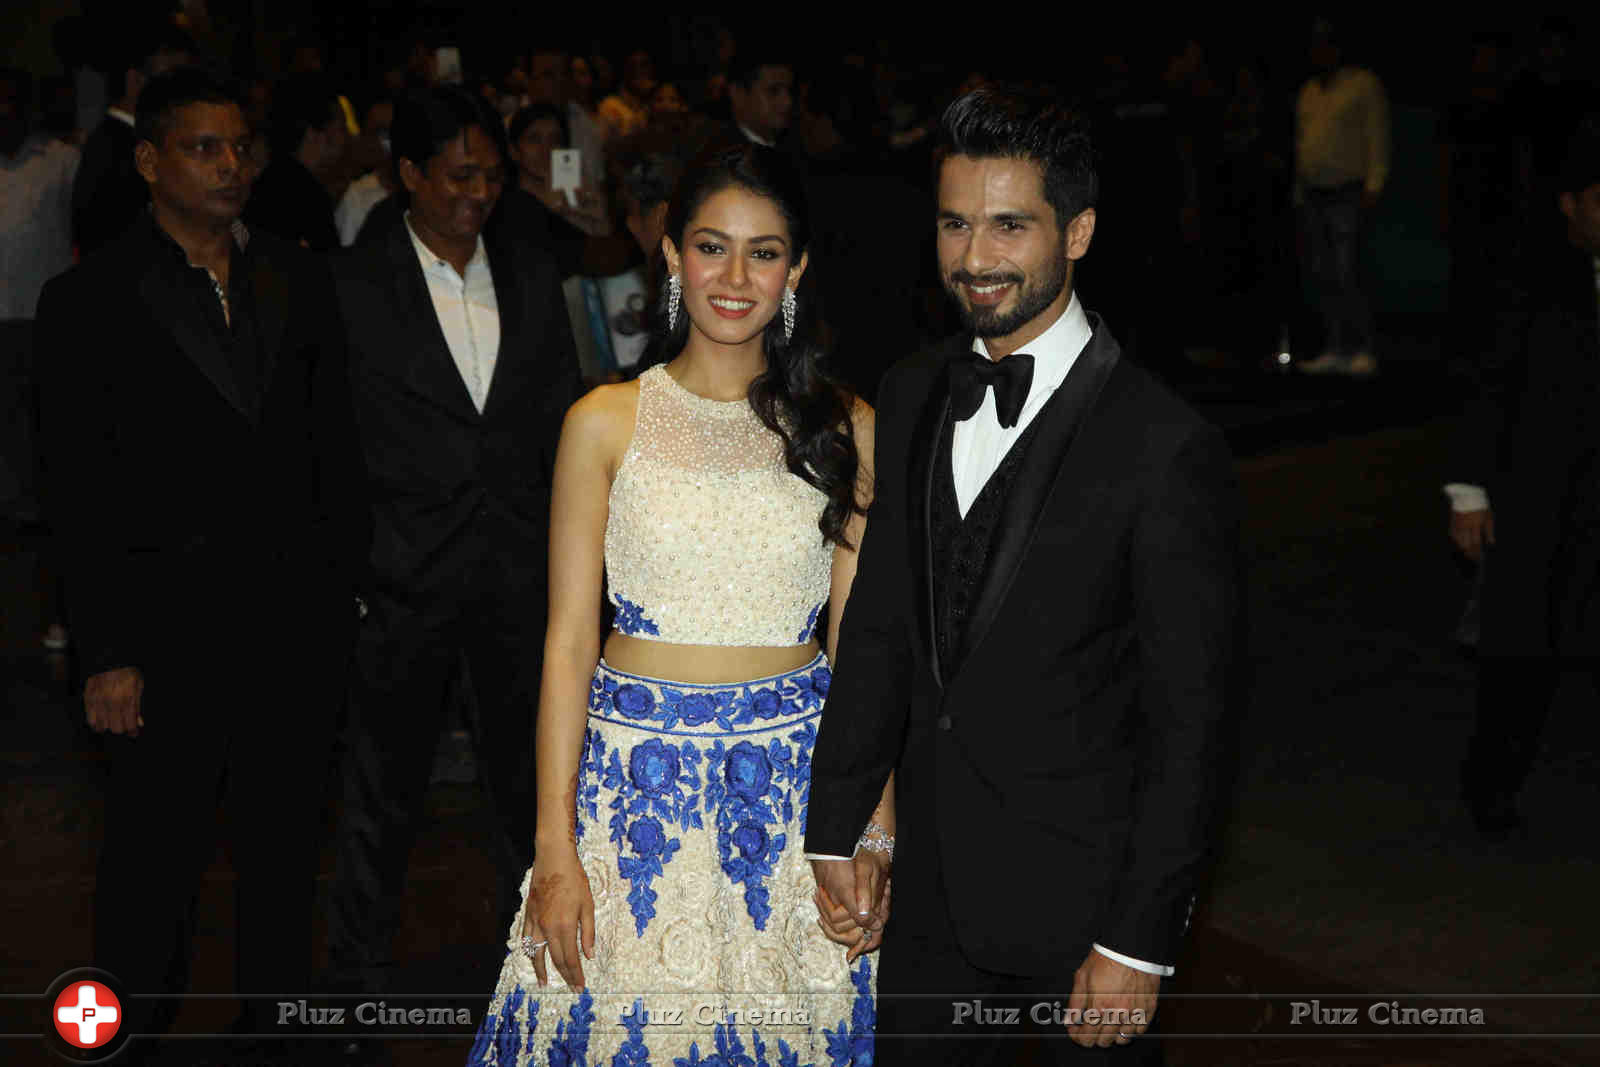 Wedding Reception of Shahid Kapoor and Mira Rajput Photos | Picture 1061542